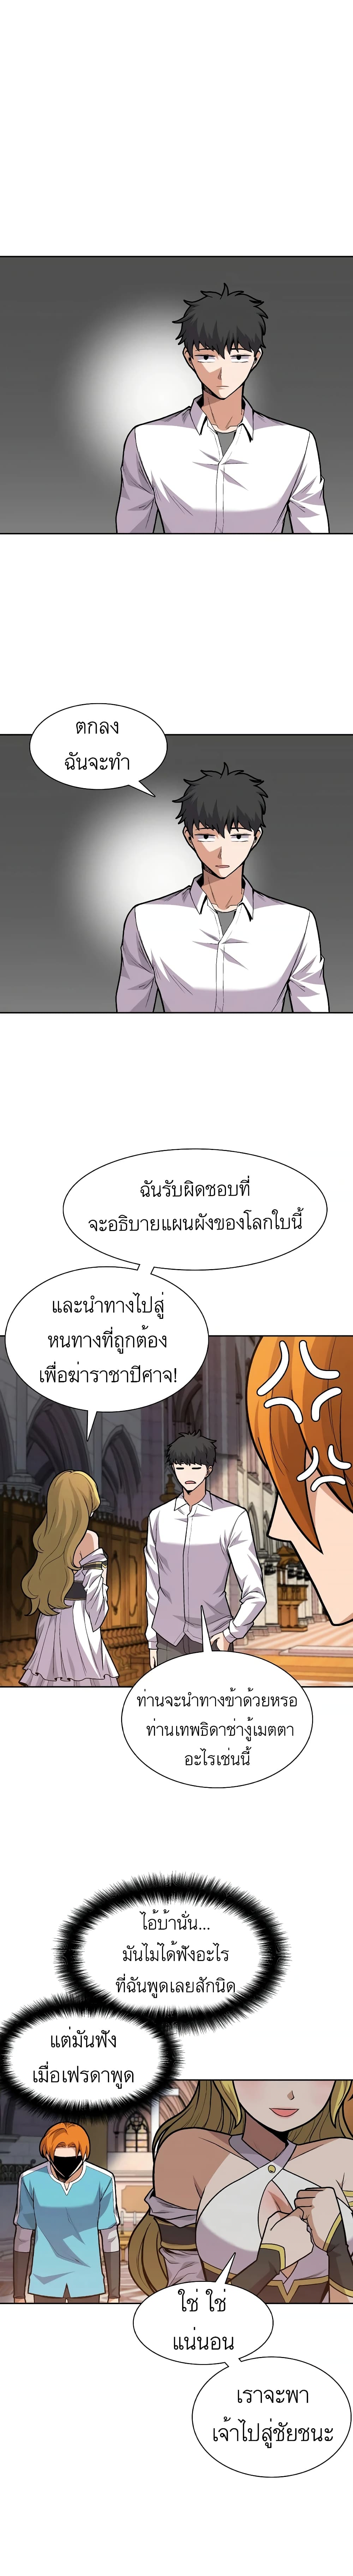 Raising Newbie Heroes In Another World ตอนที่ 2 (12)